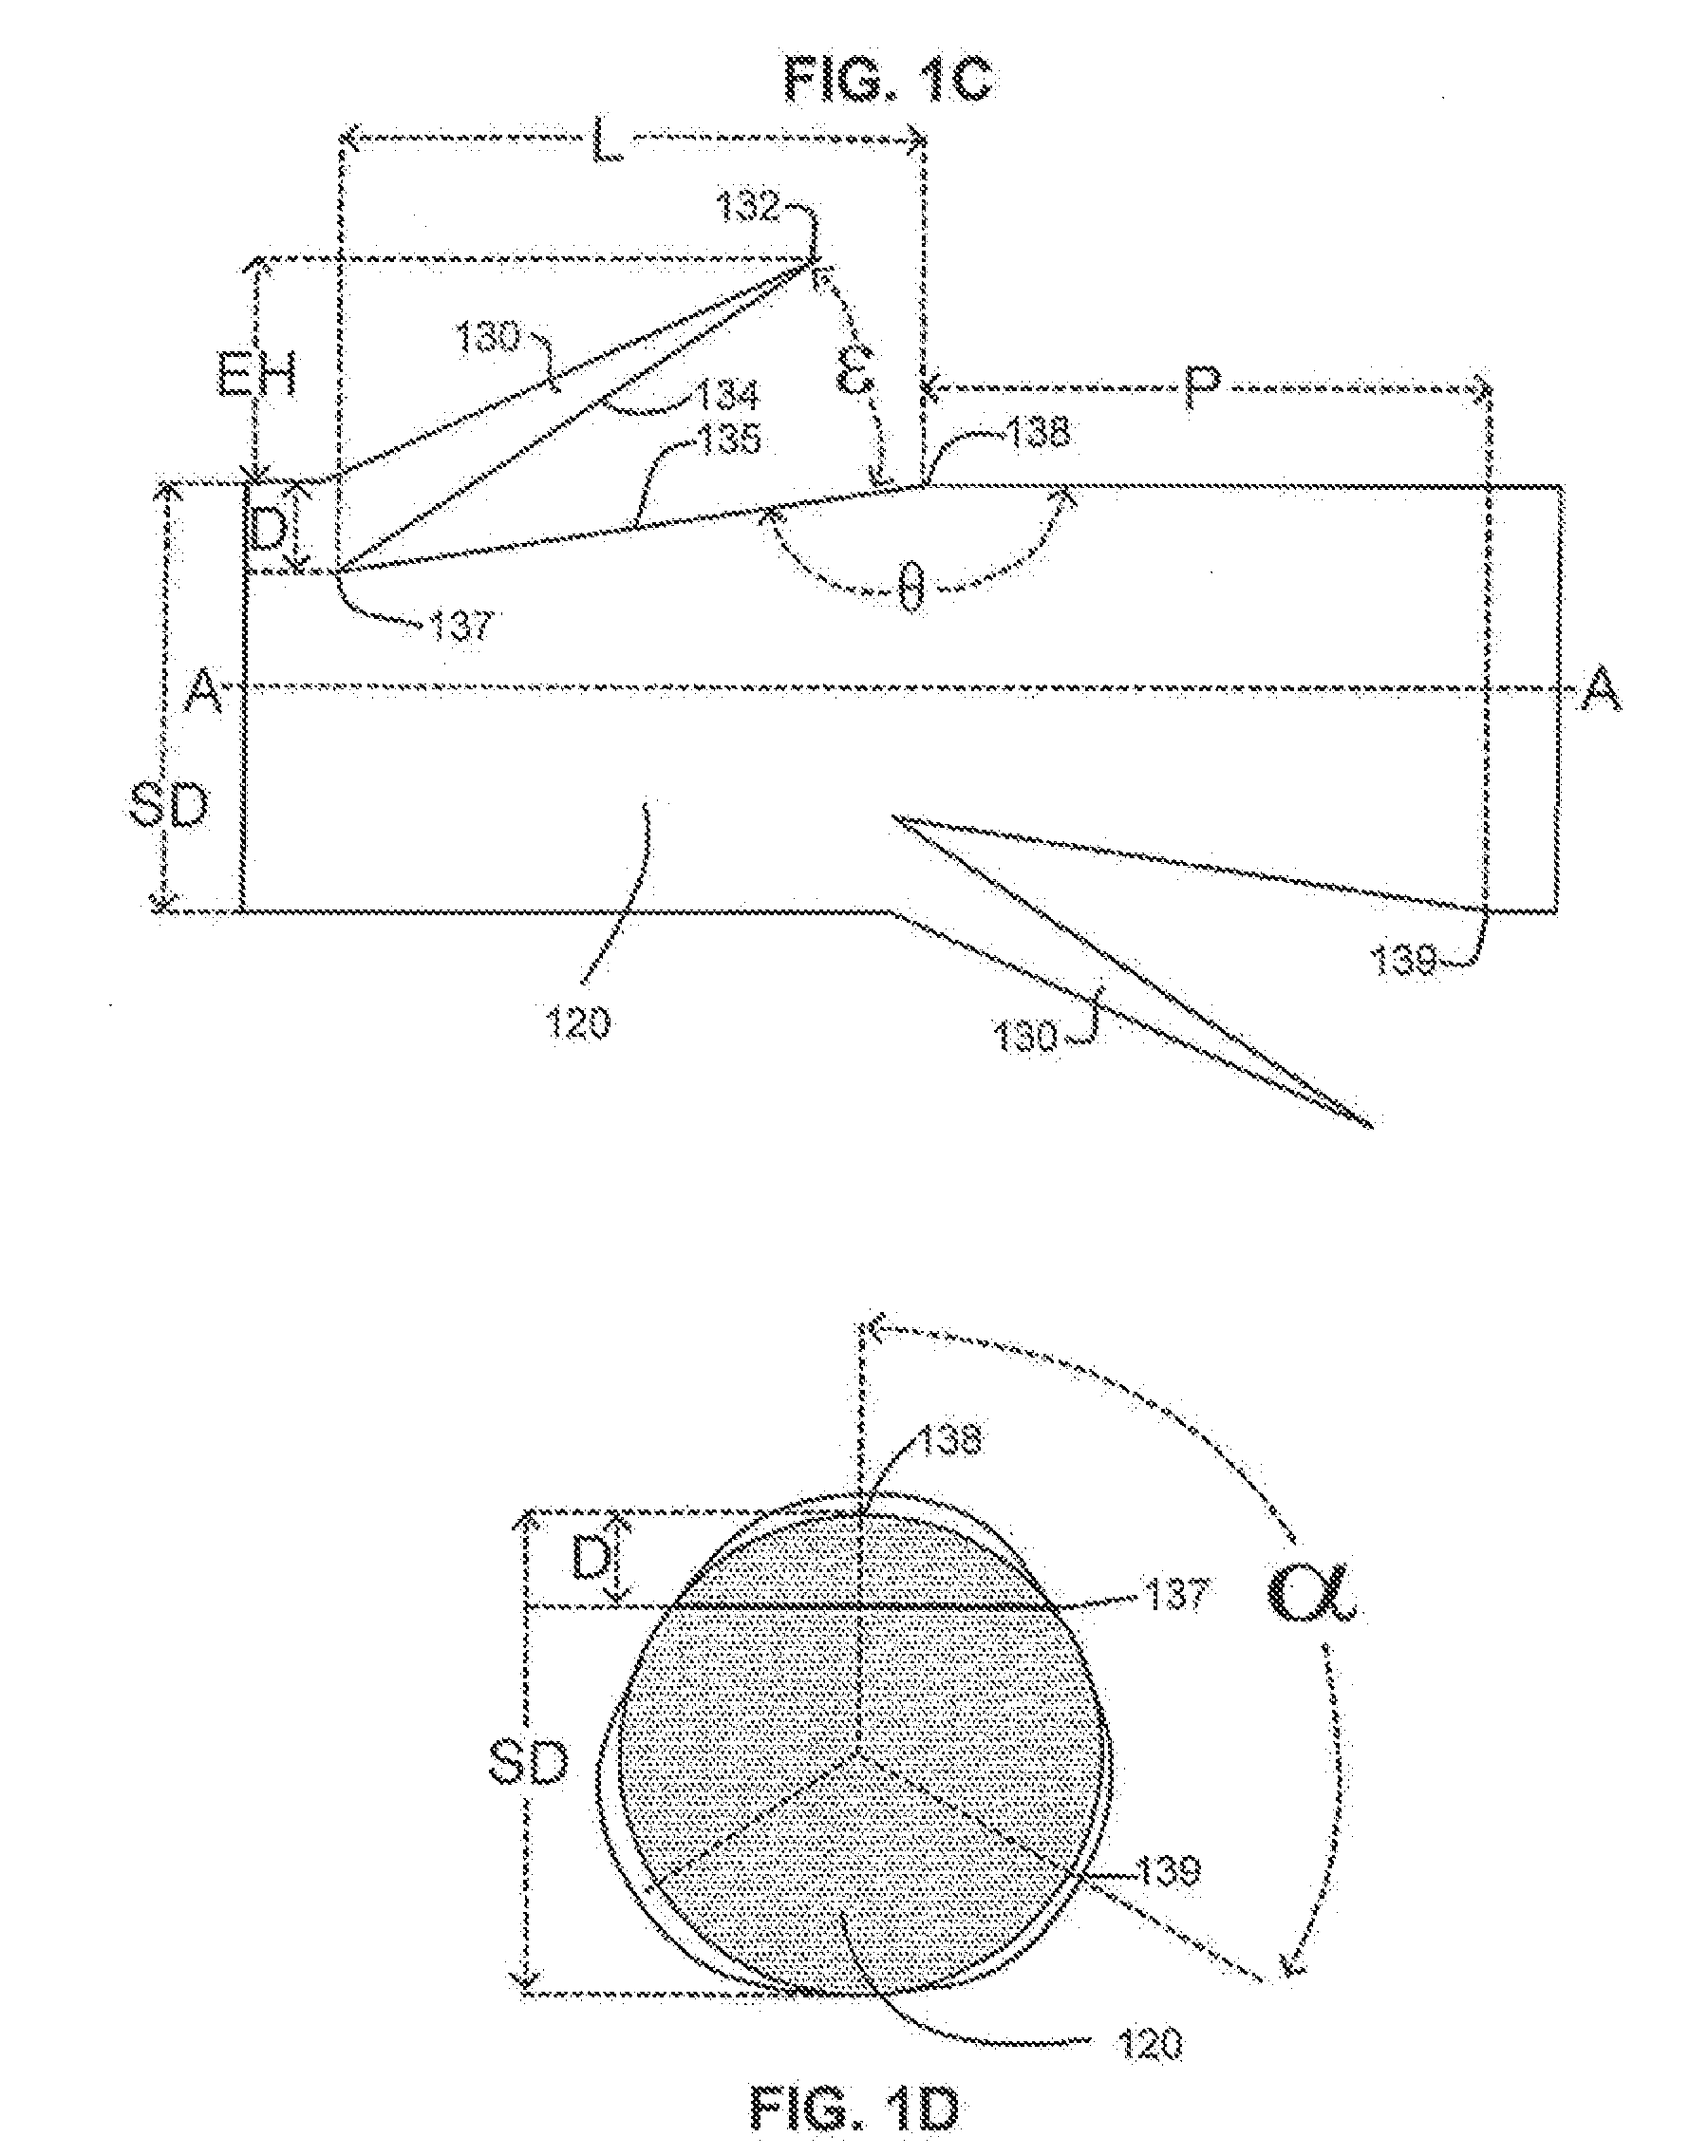 High-Density Self-Retaining Sutures, Manufacturing Equipment and Methods